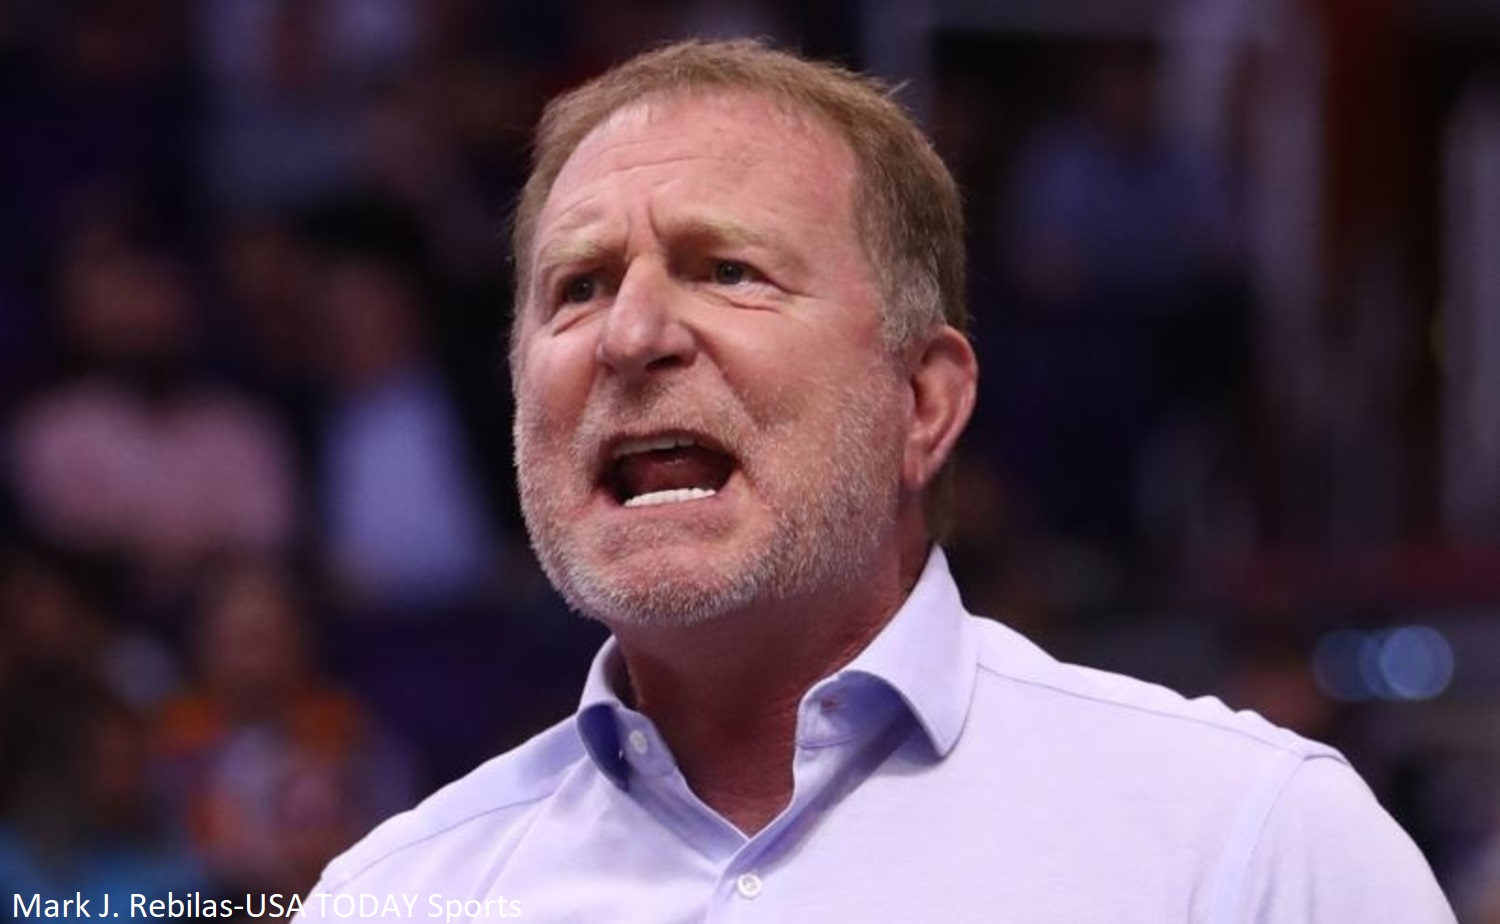 Vince Carter says Suns owner Robert Sarver told team to 'take me out' when  he returned as an opponent 